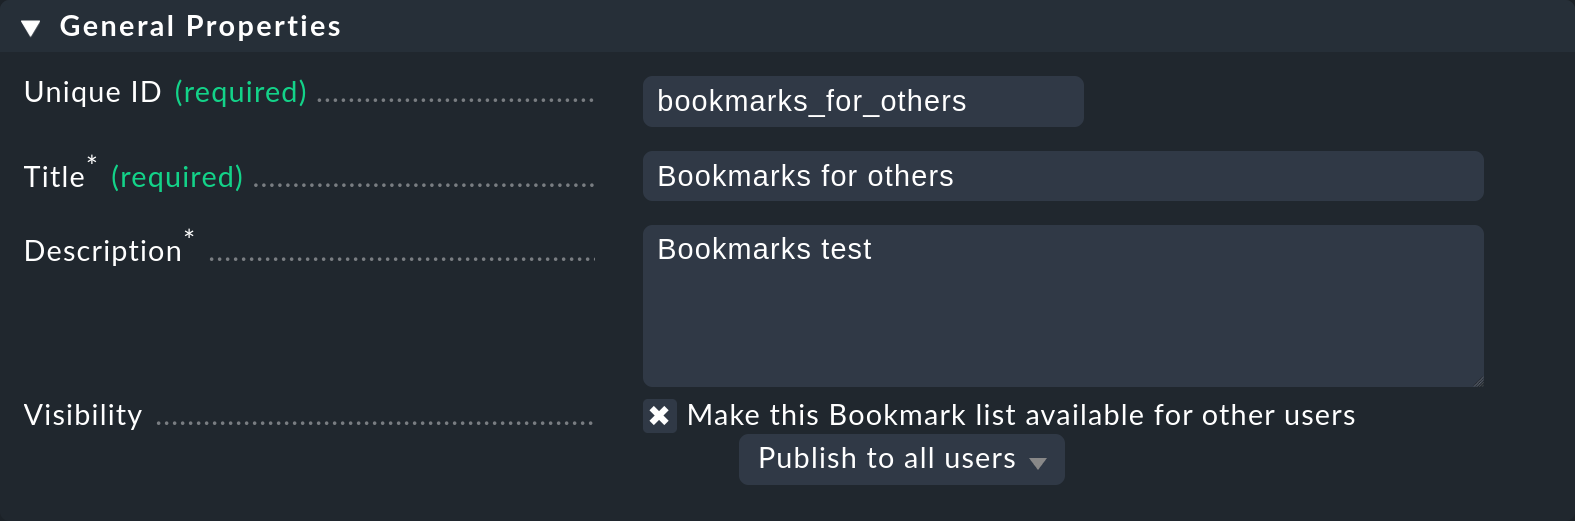 Dialog with properties when creating a bookmark list.